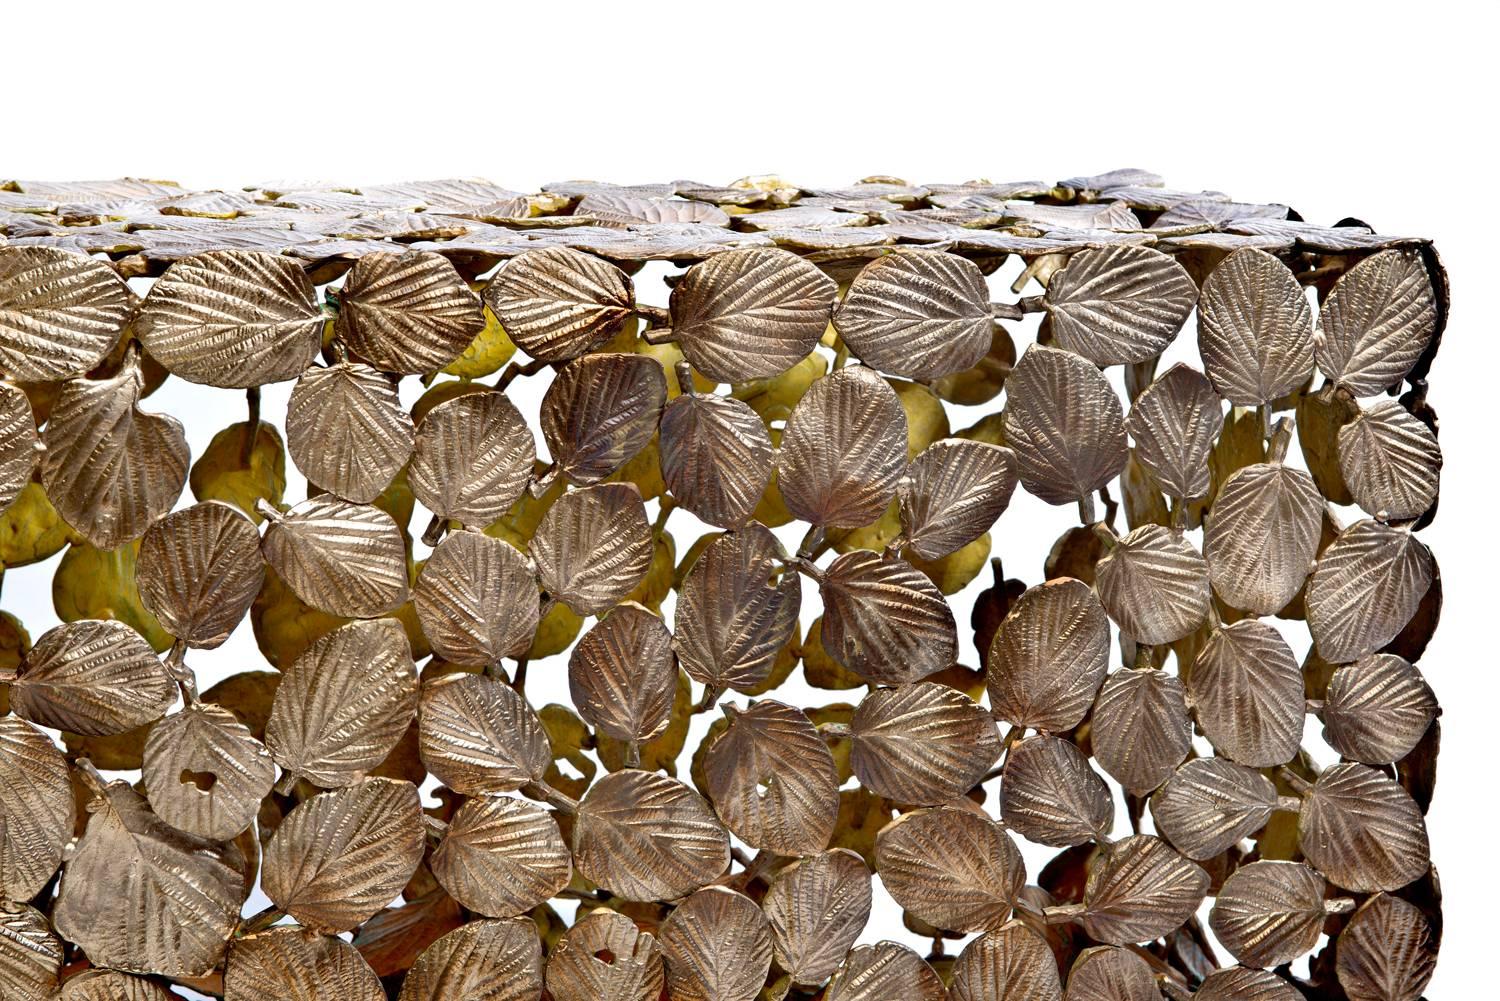 Cast bronze winter hazel leaves welded together by hand make up this exquisite piece of design by artist Gregory Nangle. The forrest bench can be displayed indoors or outdoors.

The Gregory Nangle aesthetic explores what happens when geometry is